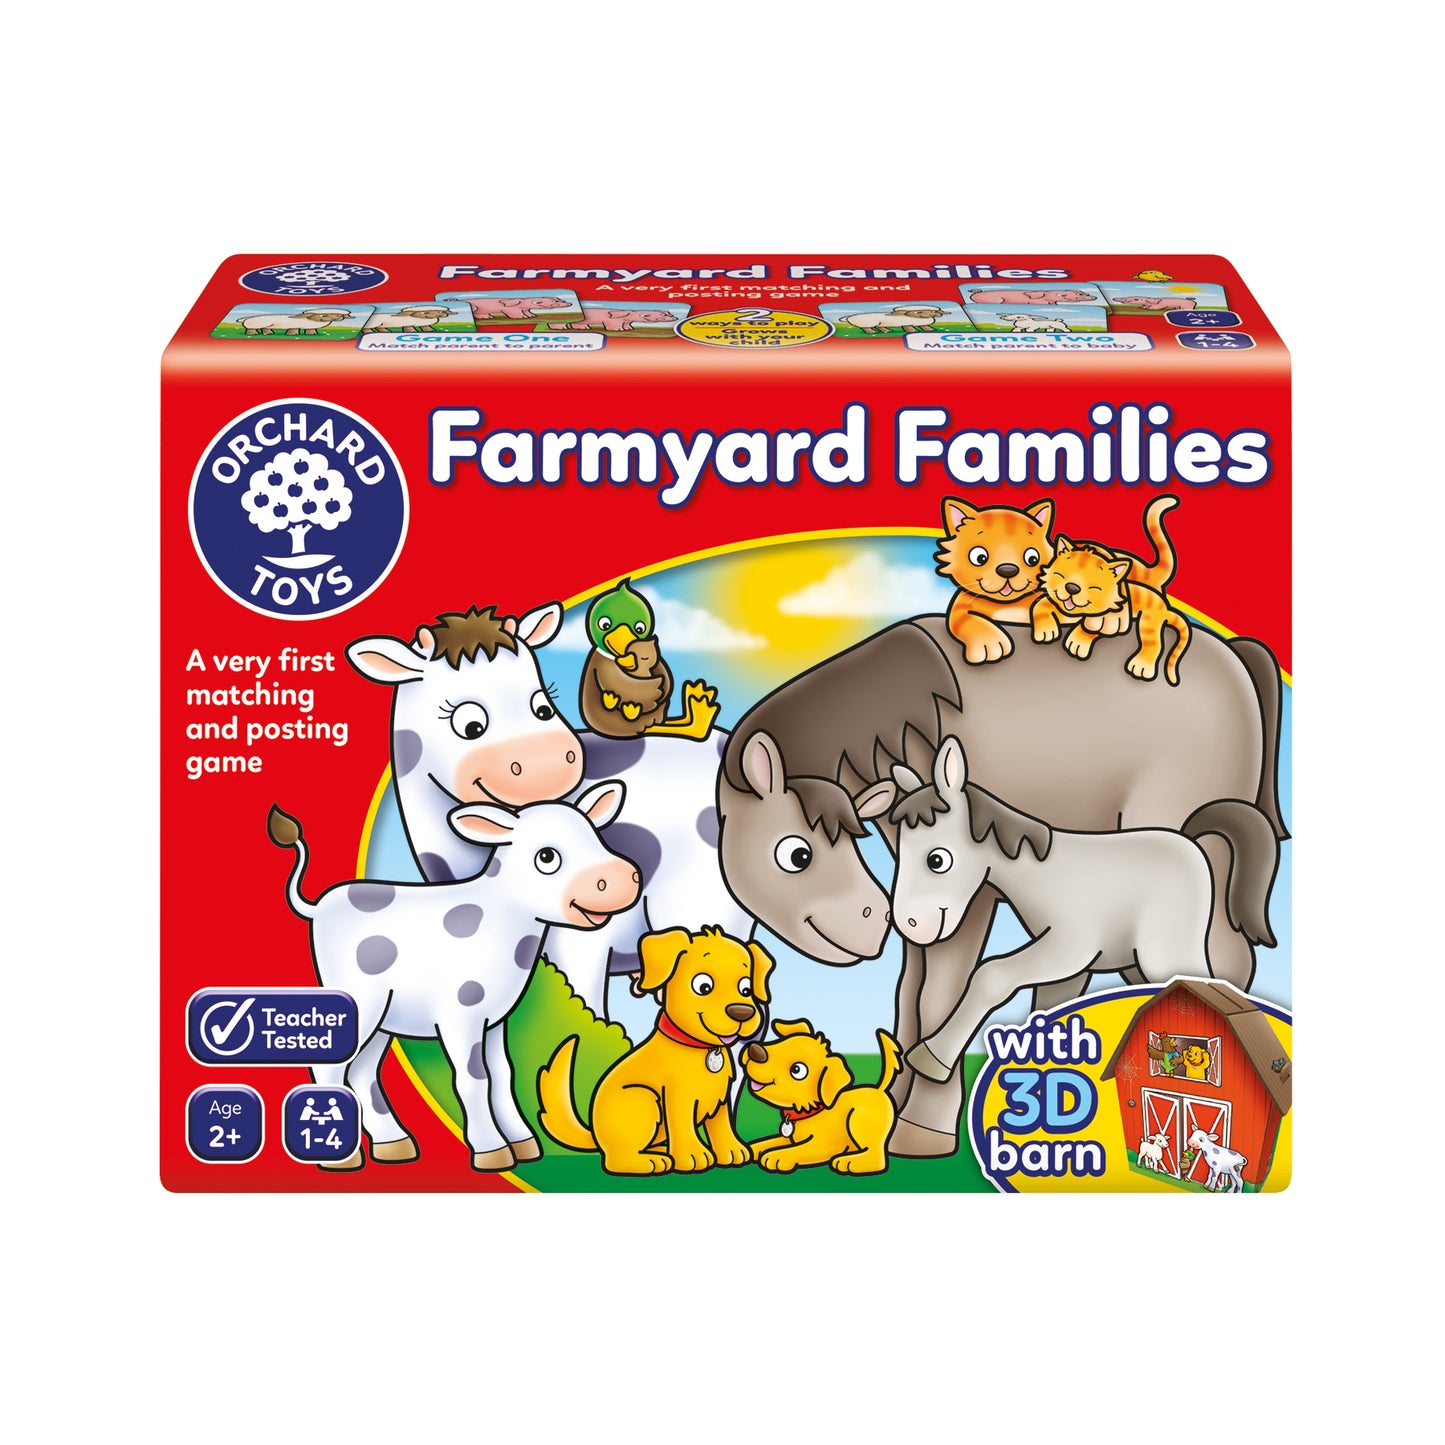 Orchard Toys Farmyard Families Matching and Posting Game